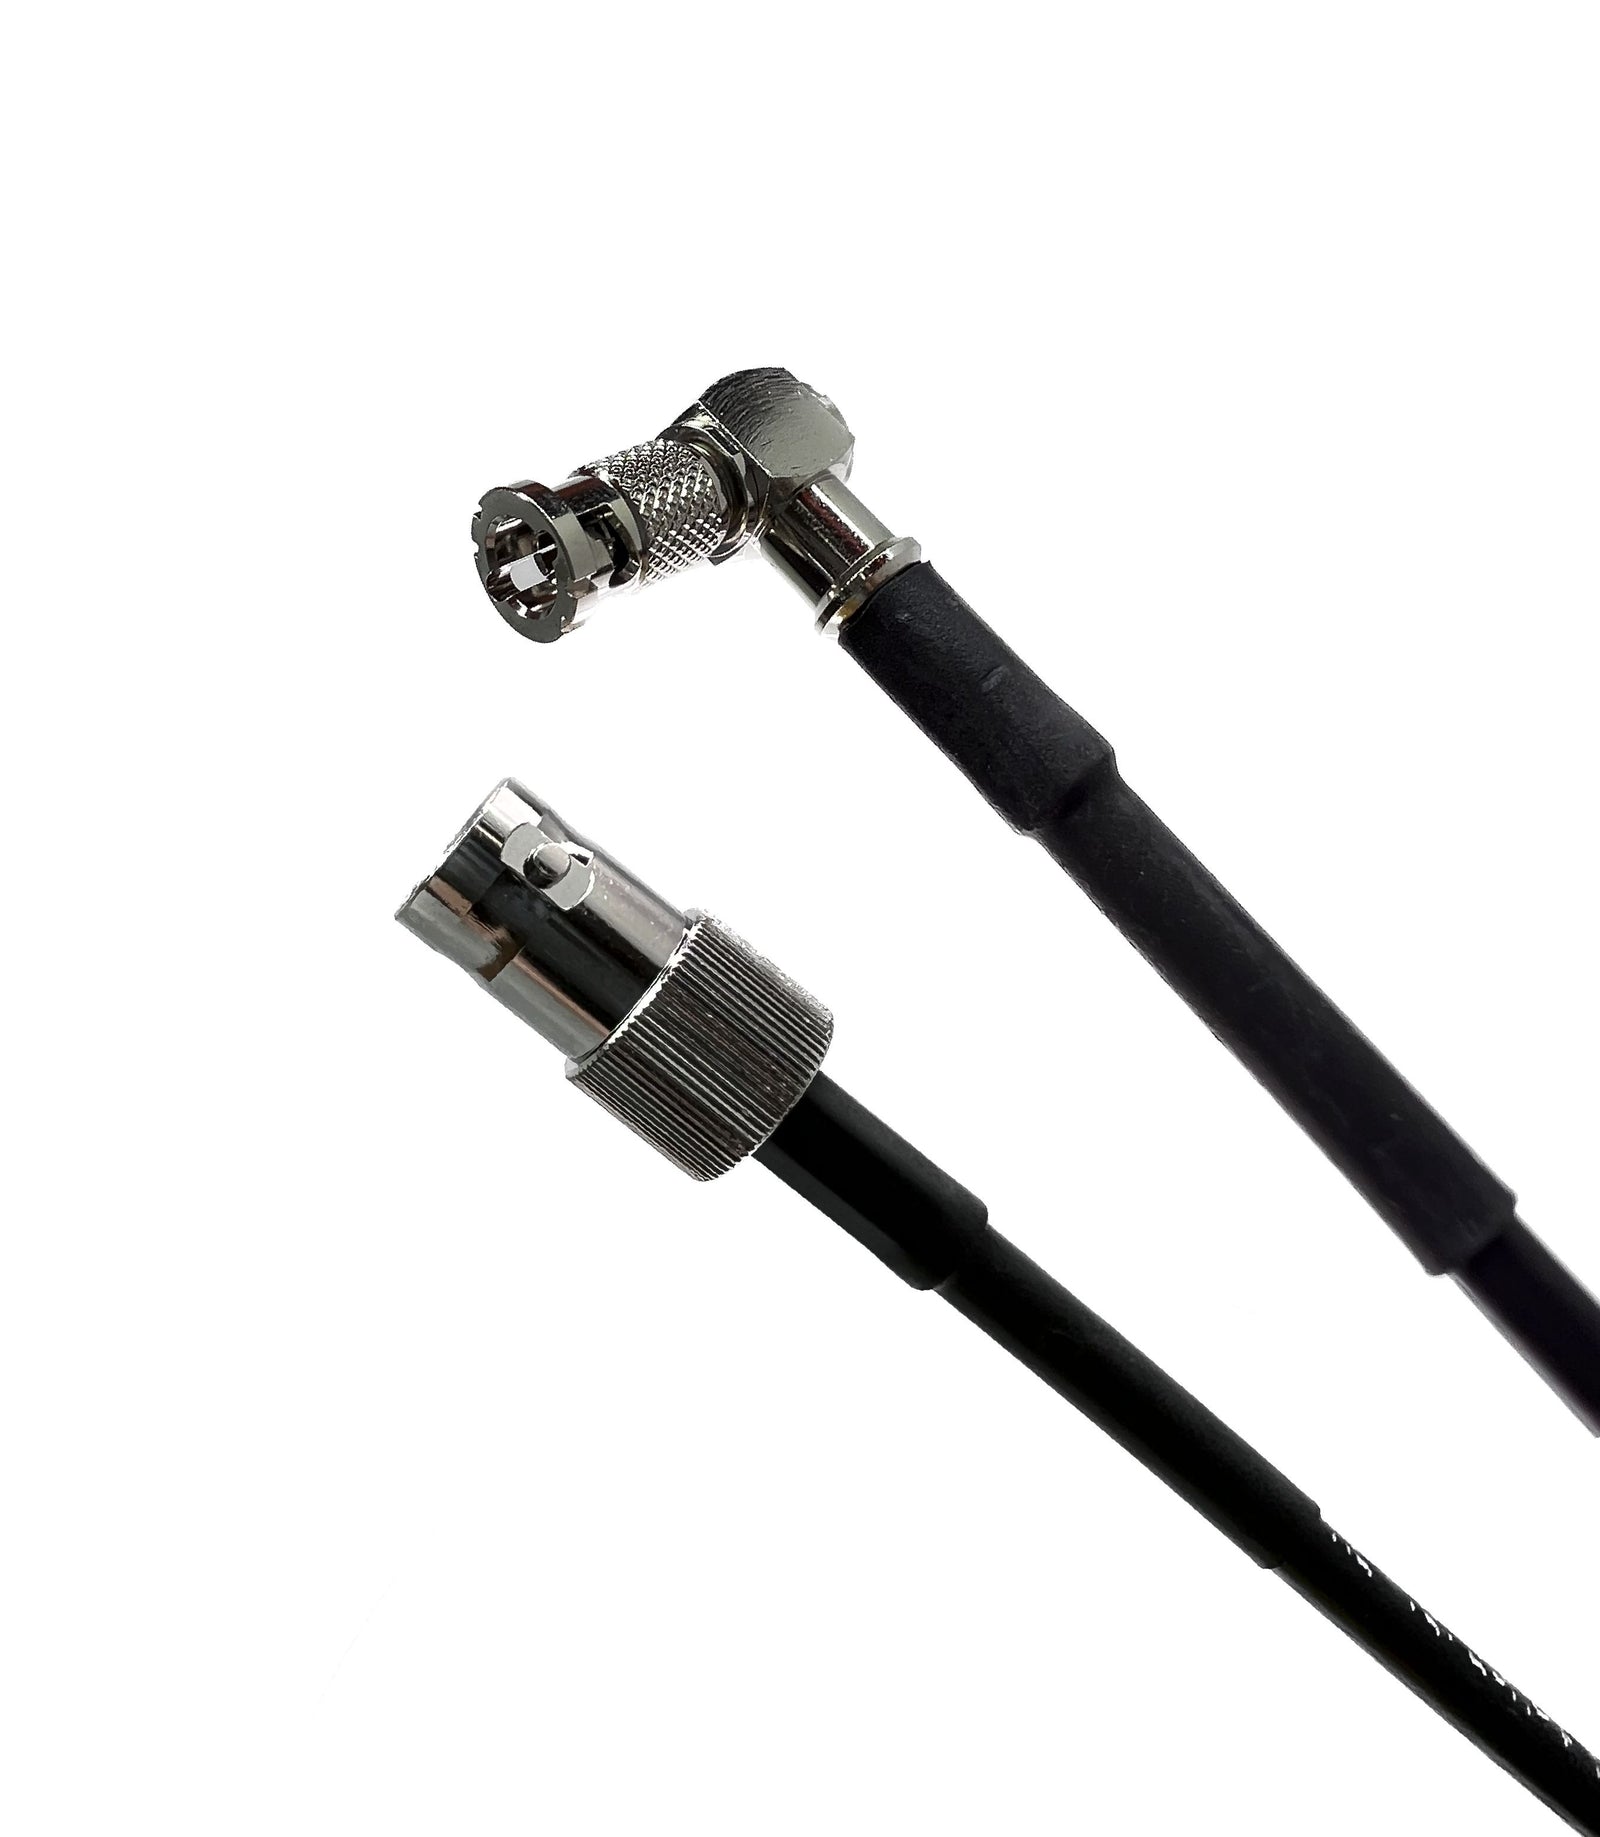 BNC Extension Cable : 2FT 3FT 4FT 5FT 8FT 10FT 12FT 14FT 16FT: Male to  female